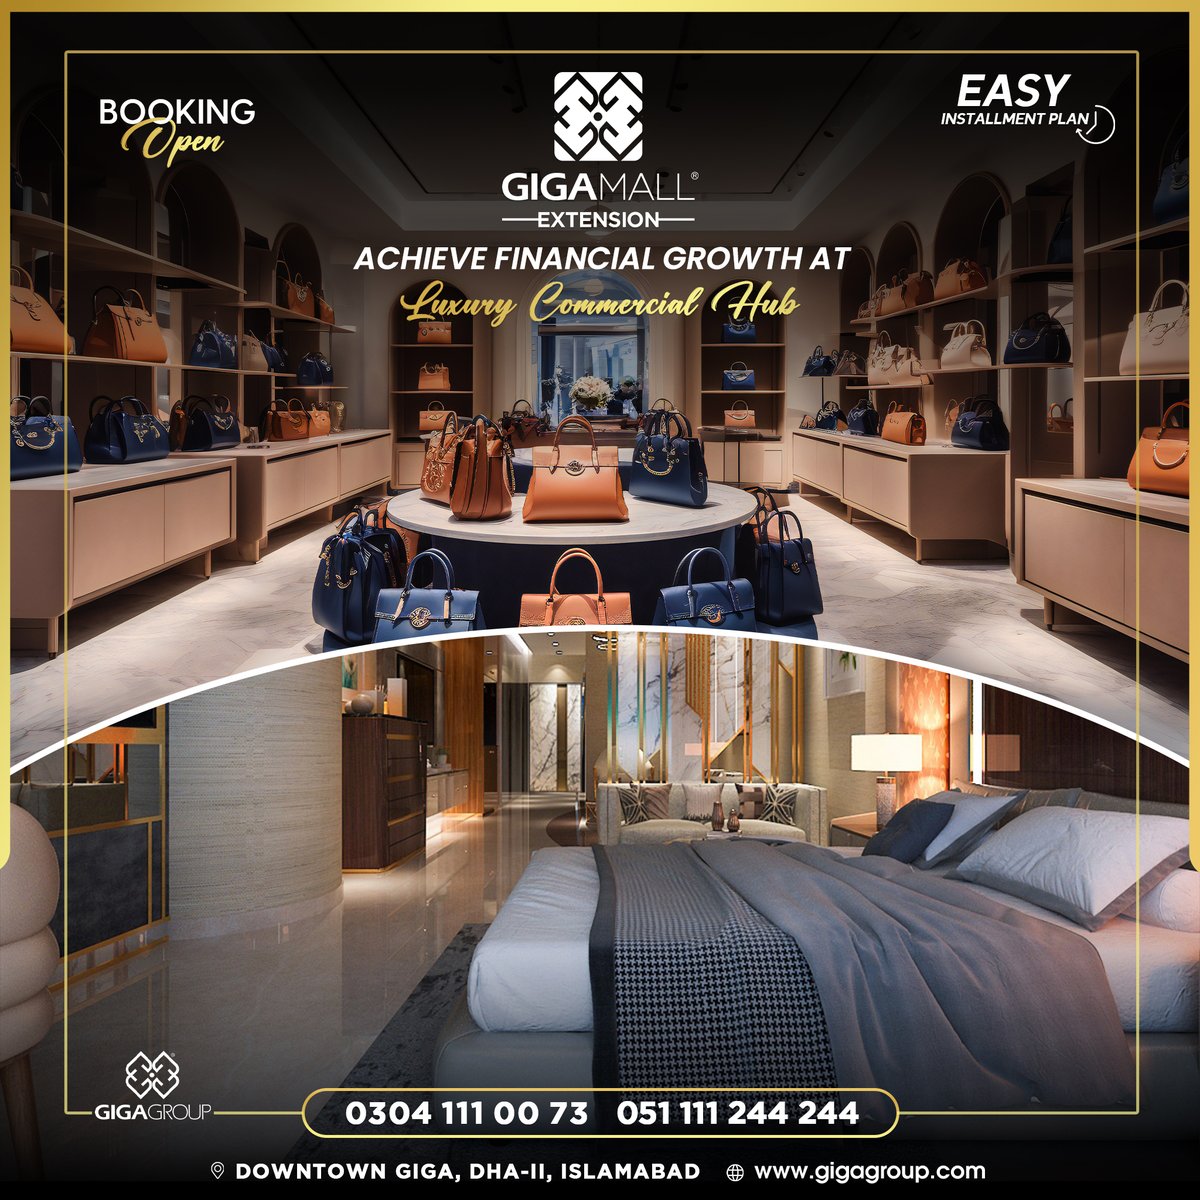 Achieve financial growth at luxury commercial hub! 𝐆𝐢𝐠𝐚 𝐆𝐫𝐨𝐮𝐩 offers a golden opportunity to secure your investment in 𝐋𝐮𝐱𝐮𝐫𝐲 𝐇𝐨𝐭𝐞𝐥 𝐀𝐩𝐚𝐫𝐭𝐦𝐞𝐧𝐭𝐬 and 𝐂𝐨𝐦𝐦𝐞𝐫𝐜𝐢𝐚𝐥 𝐒𝐡𝐨𝐩𝐬 in 𝐆𝐢𝐠𝐚 𝐌𝐚𝐥𝐥 𝐄𝐱𝐭𝐞𝐧𝐬𝐢𝐨𝐧 located in the new urban hub of…